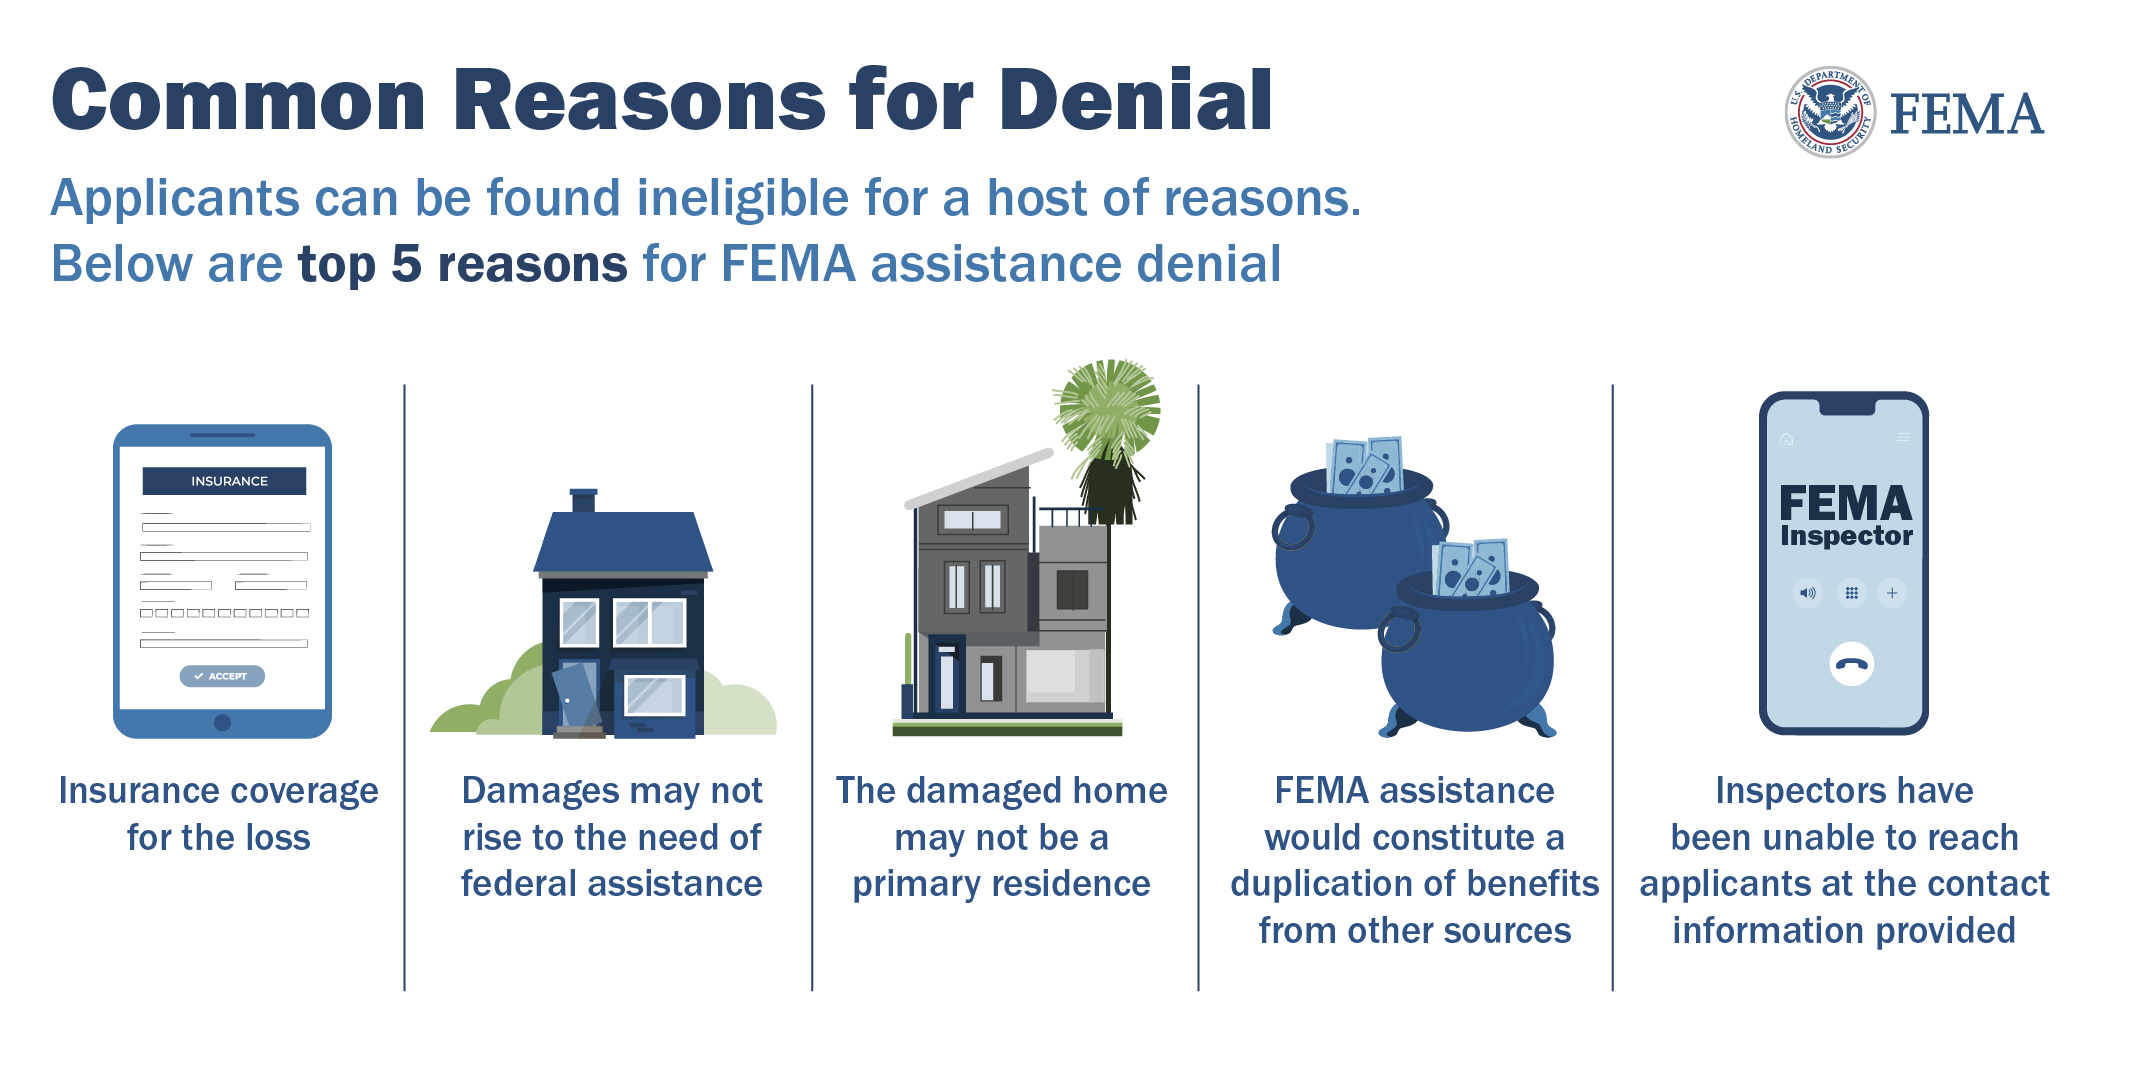 Common Reasons for Denial: Applicants can be found ineligible for a host of reasons. Here are top five reasons for FEMA assistance denial: 1. Insurance coverage for the loss. 2. Damages may not rise to the need of federal assistance. 3. The damaged home may not be a primary residence. 4. FEMA assistance would constitute a duplication of benefits from other sources. 5. Inspectors have been unable to reach applicants at the contact information provided.